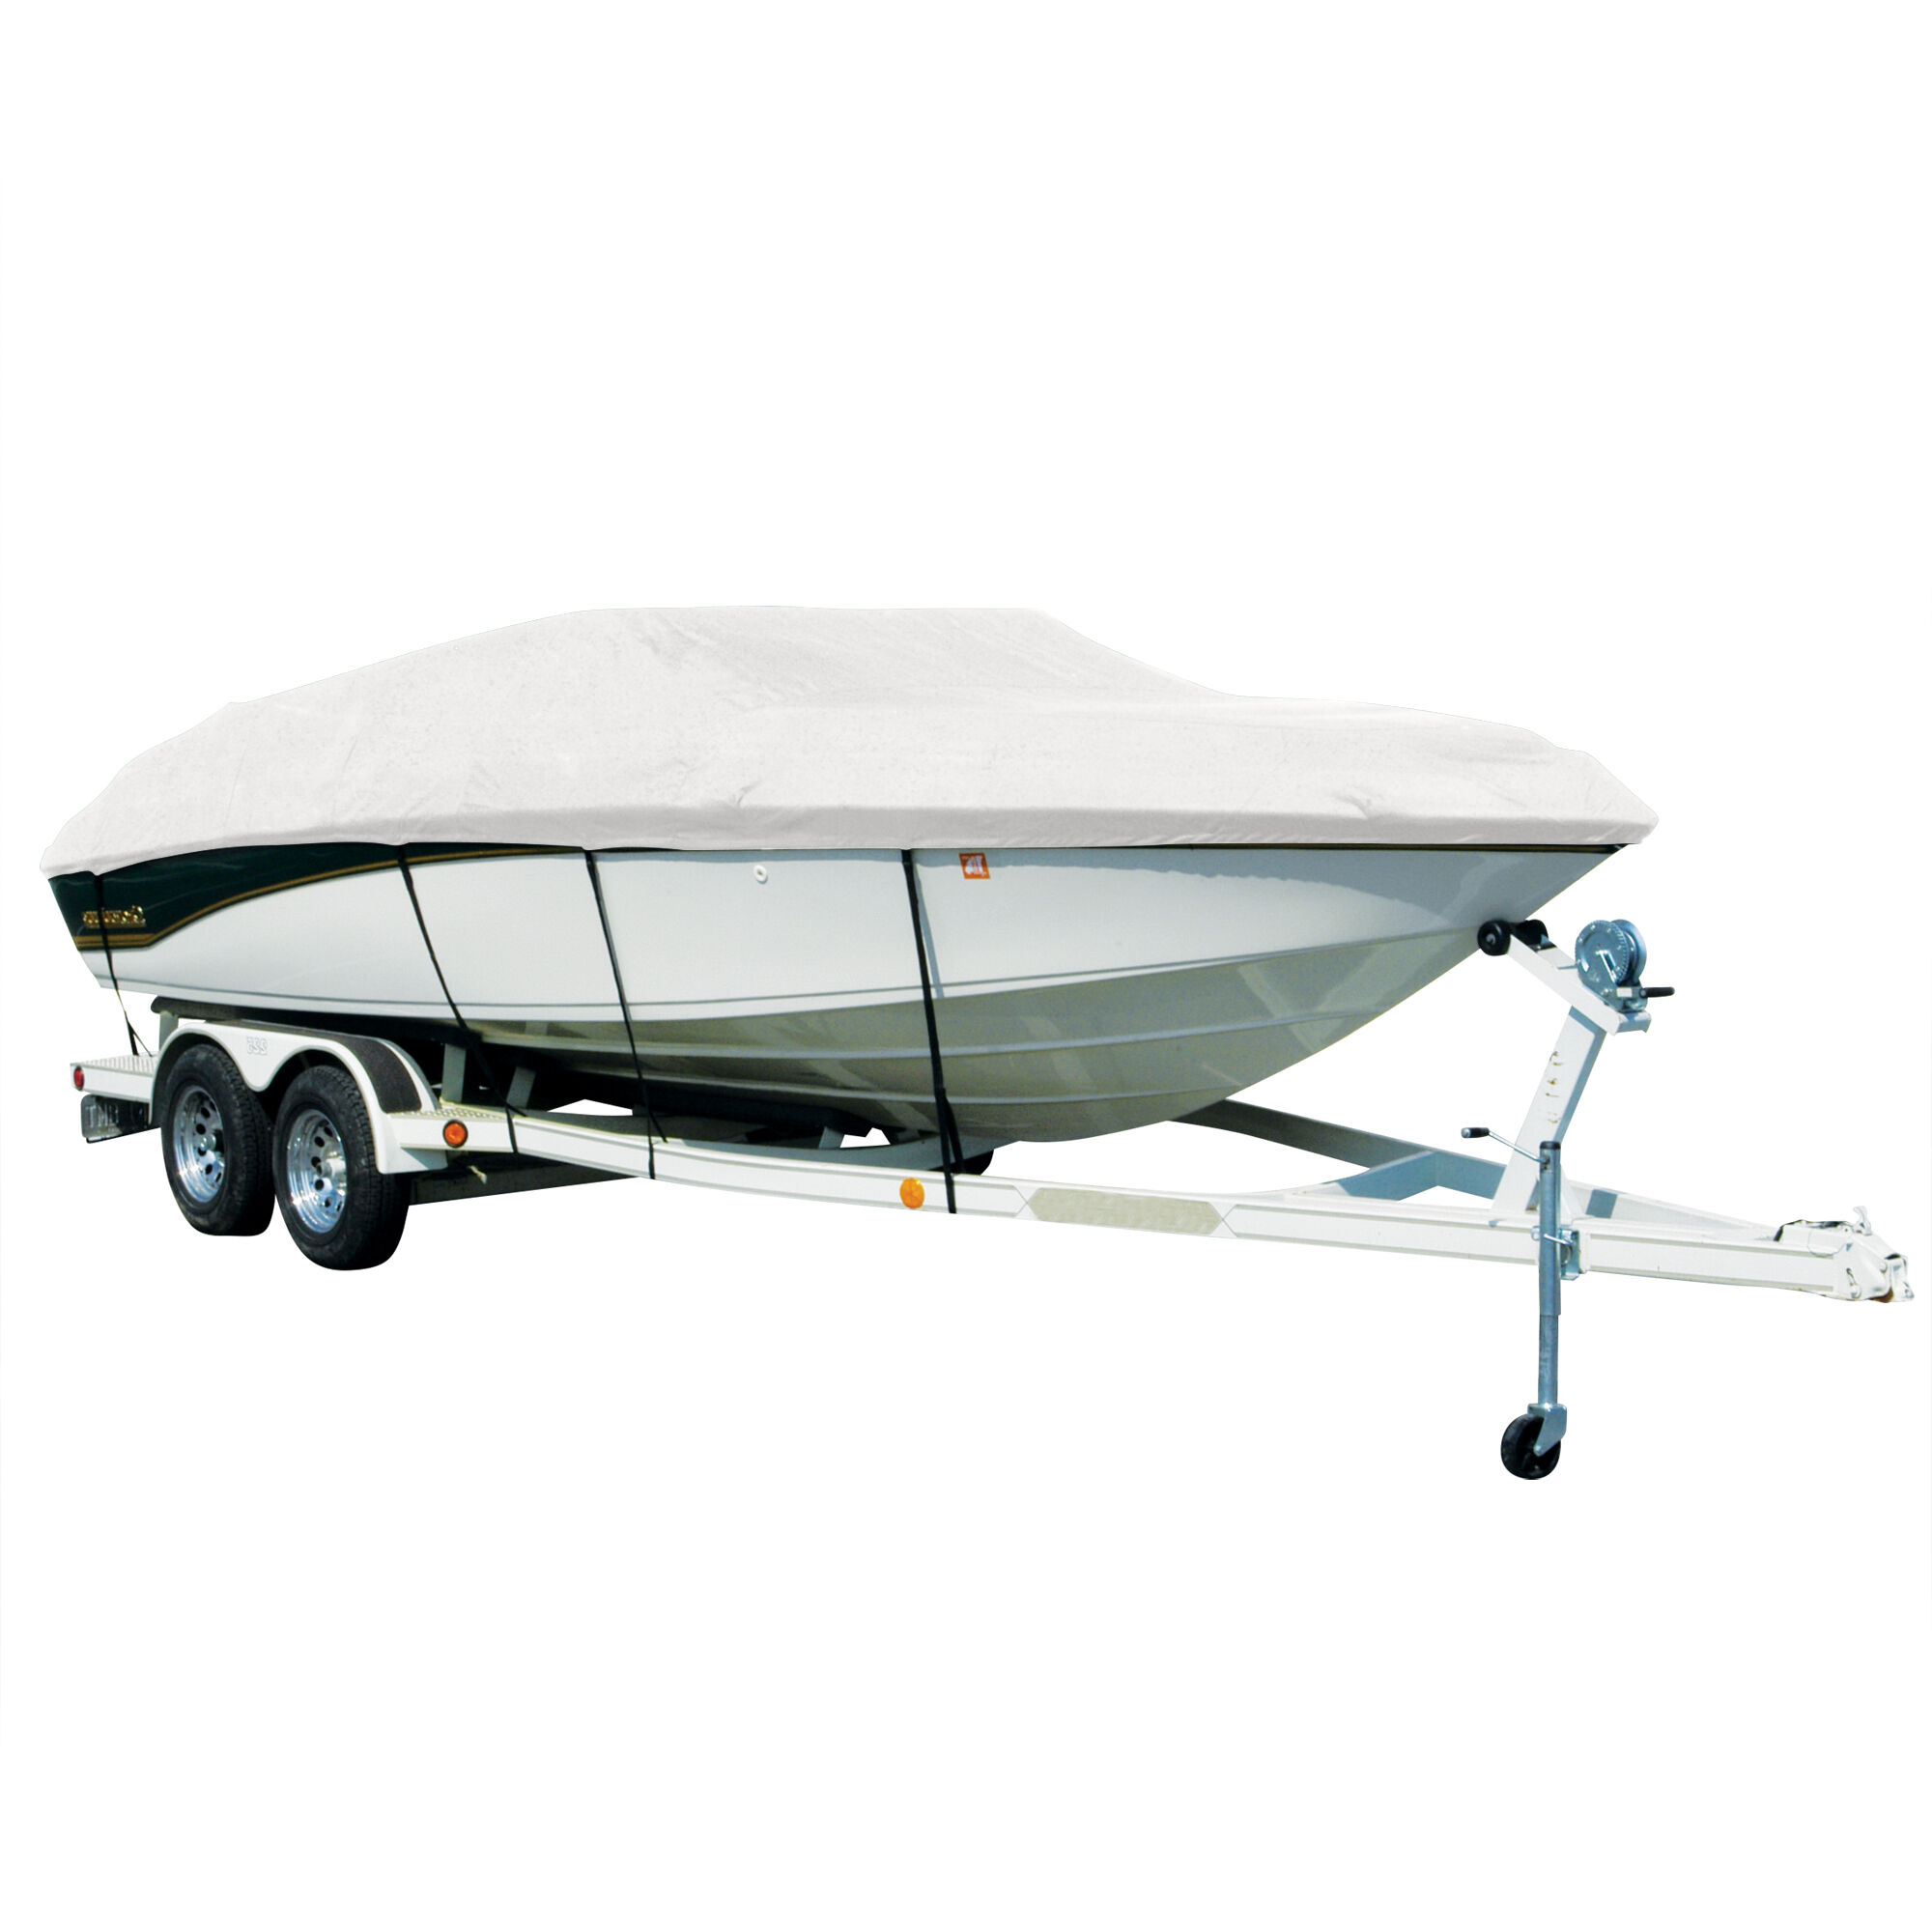 Covermate Hurricane Sharkskin Exact-Fit Nitro Boat Cover Fits 1999-2005 Nitro NX 882 SC Outboard w/ Port Trolling Motor in White